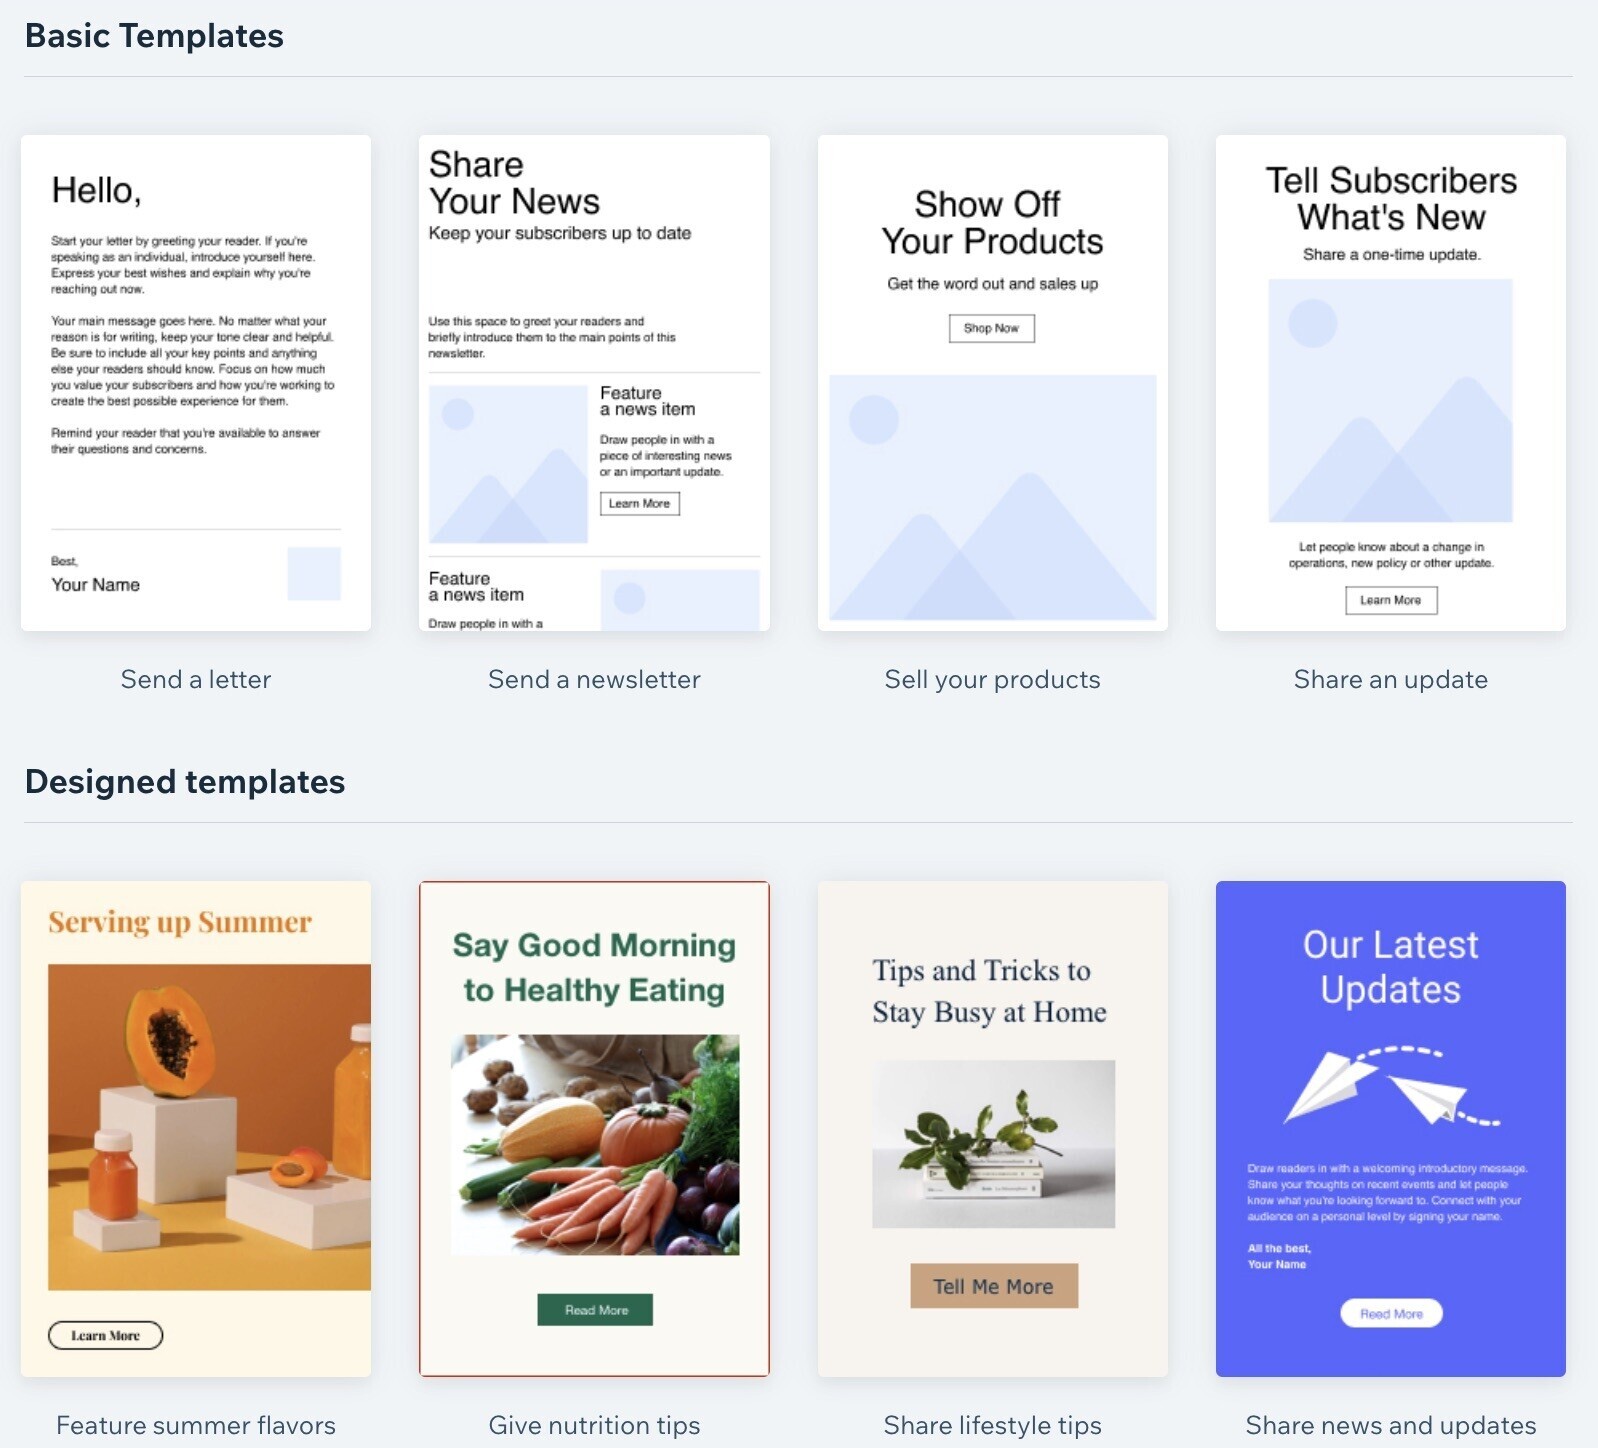 Wix’s email templates page